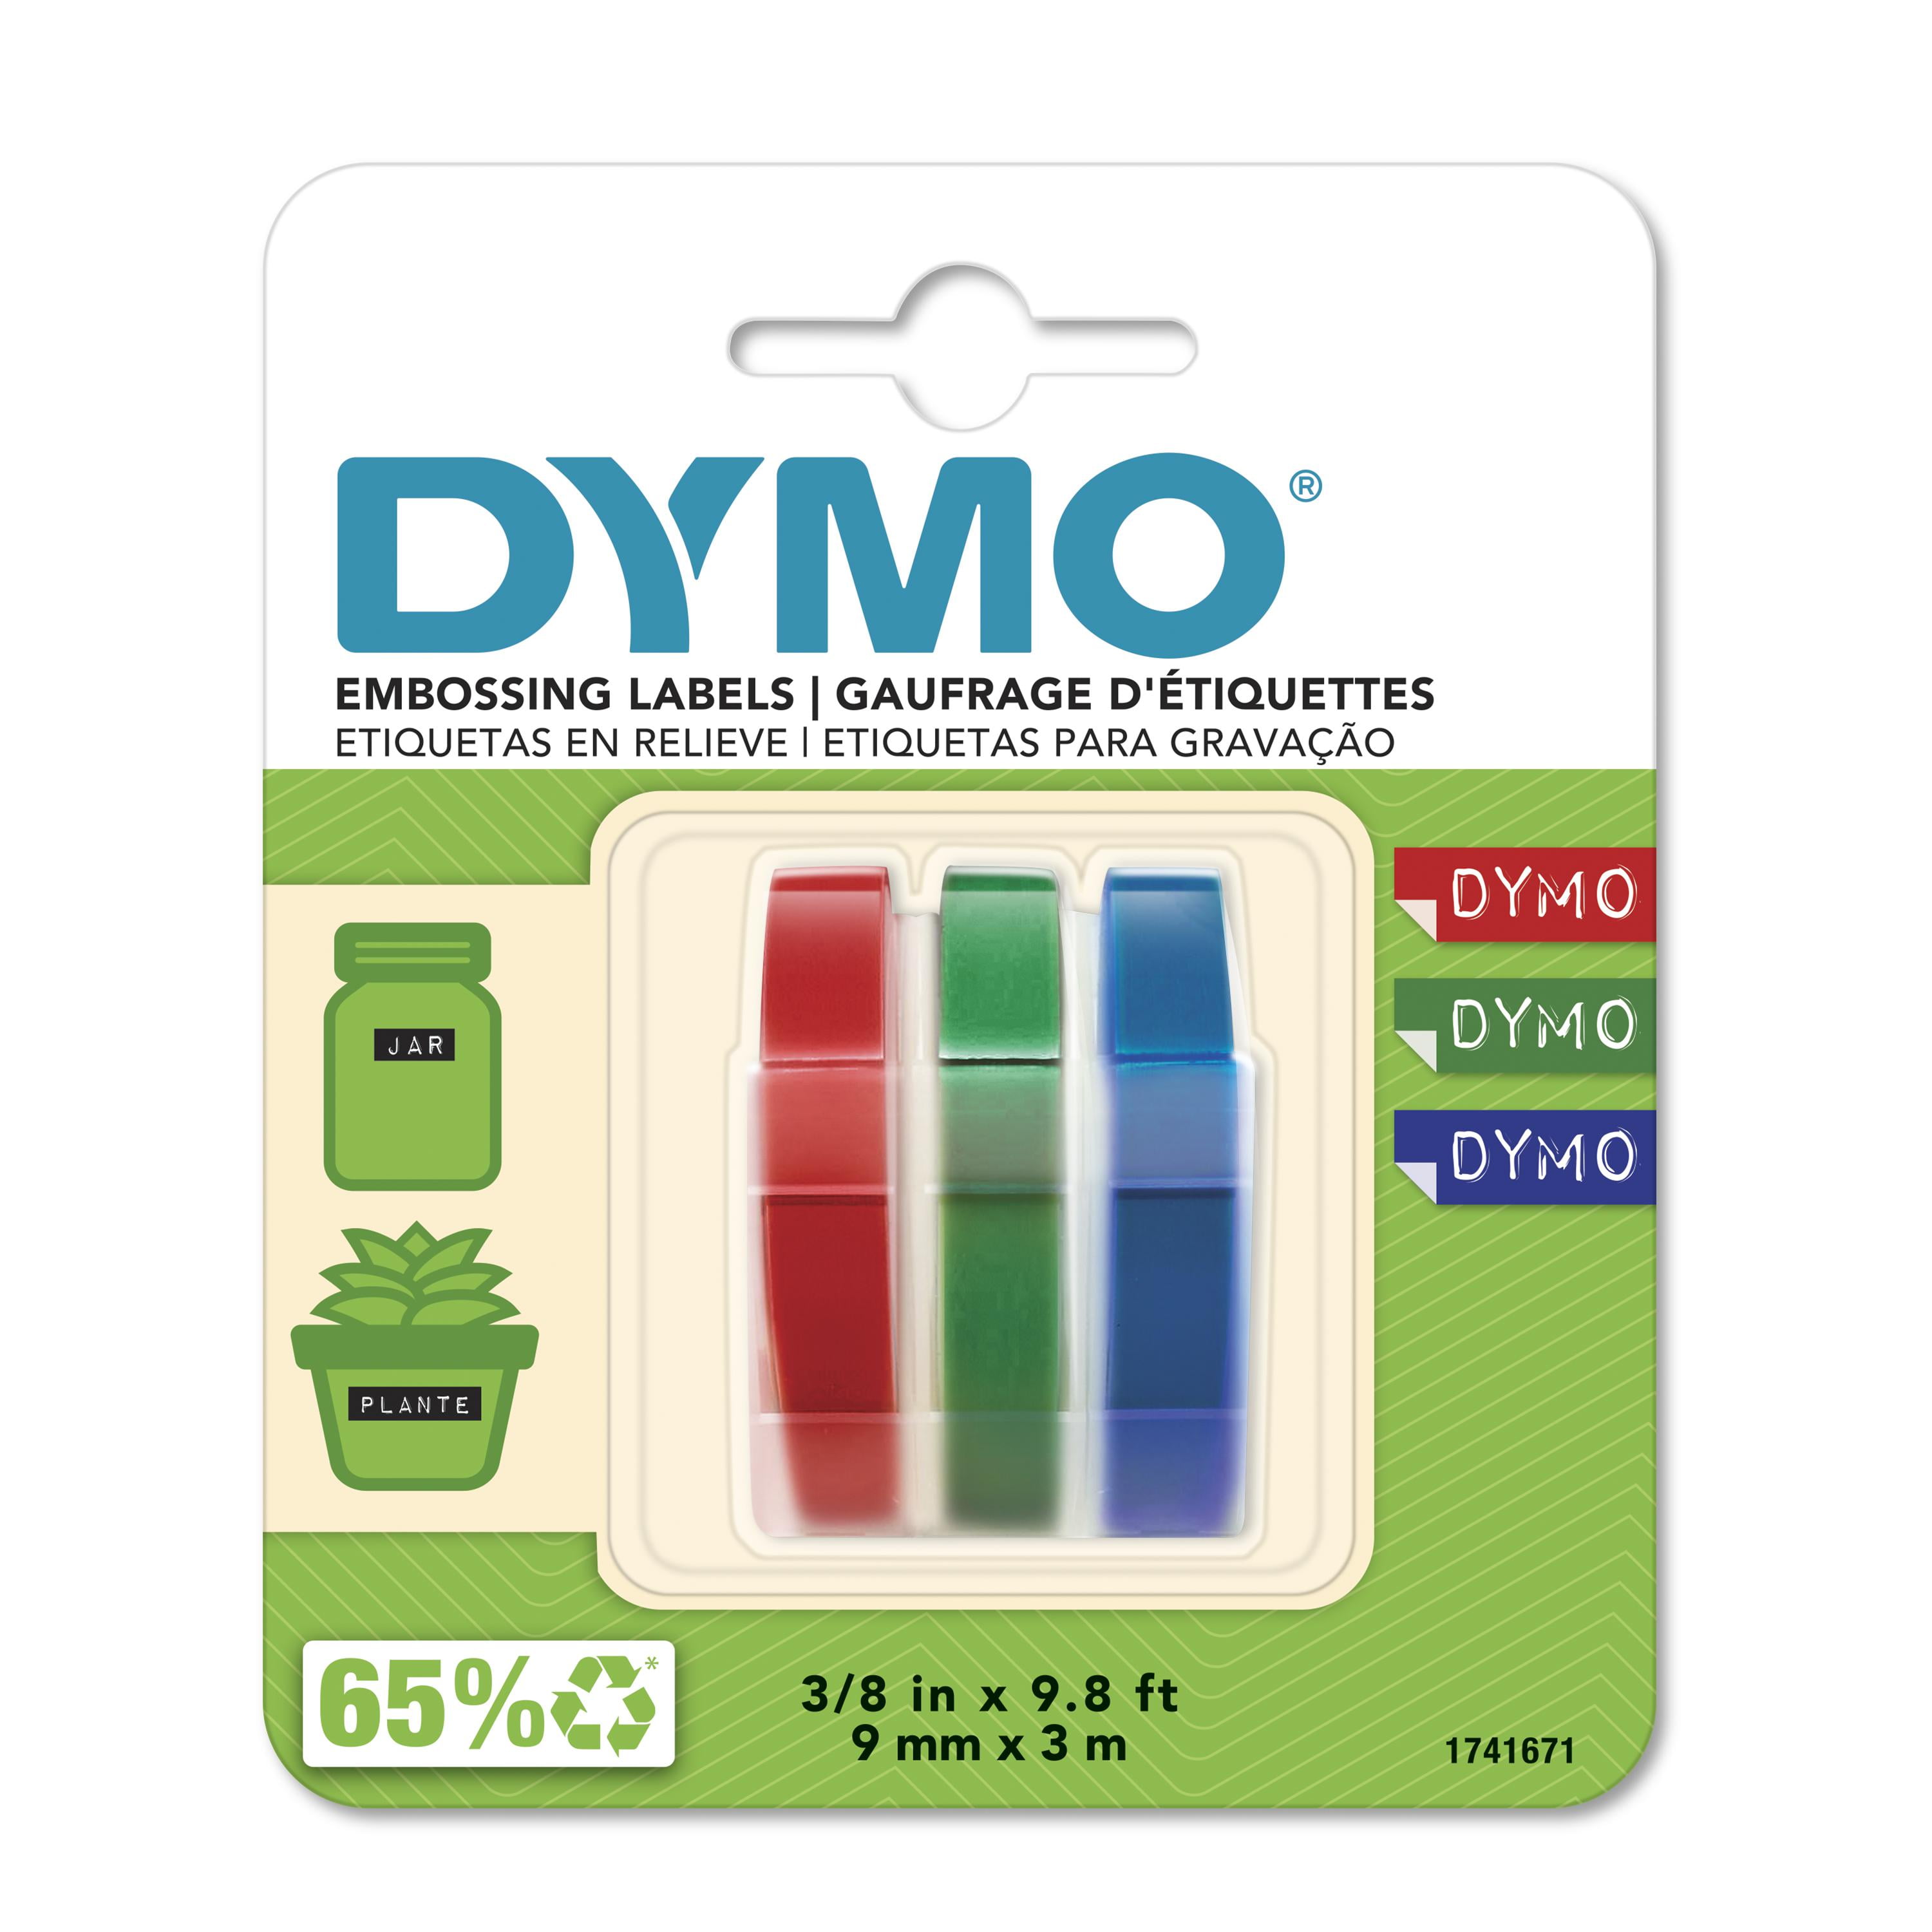 Aluminum -:- Sold as 2 Packs of Total of 2 Each / 1/2x12 Size 1 Dymo Corporation : Aluminum Tape with Adhesive